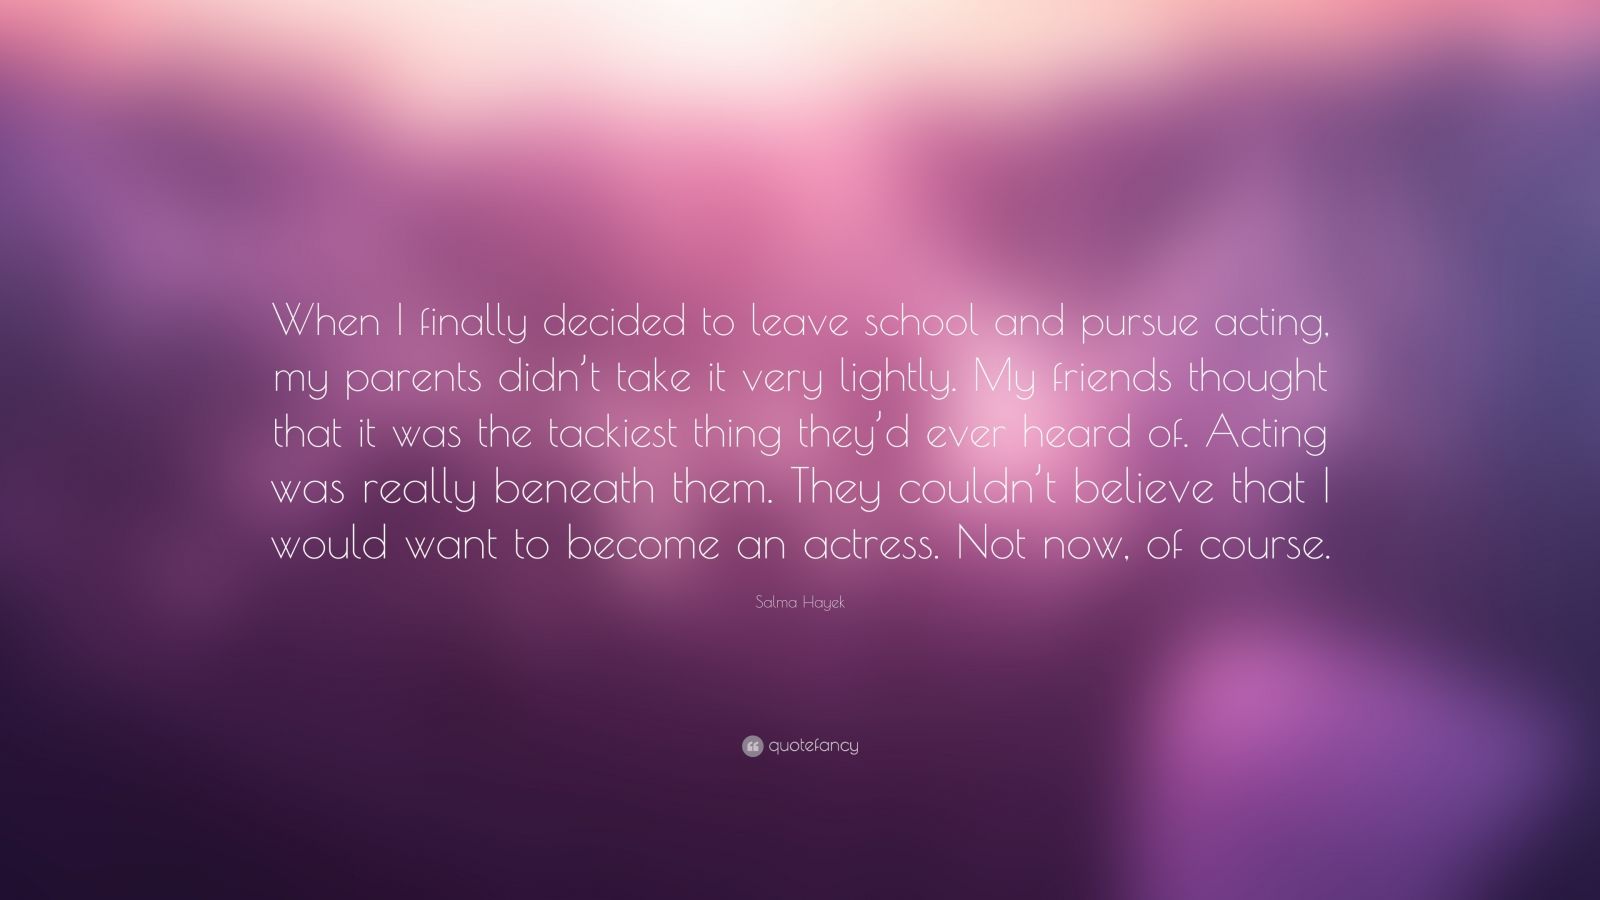 Salma Hayek Quote: “When I finally decided to leave school and pursue ...